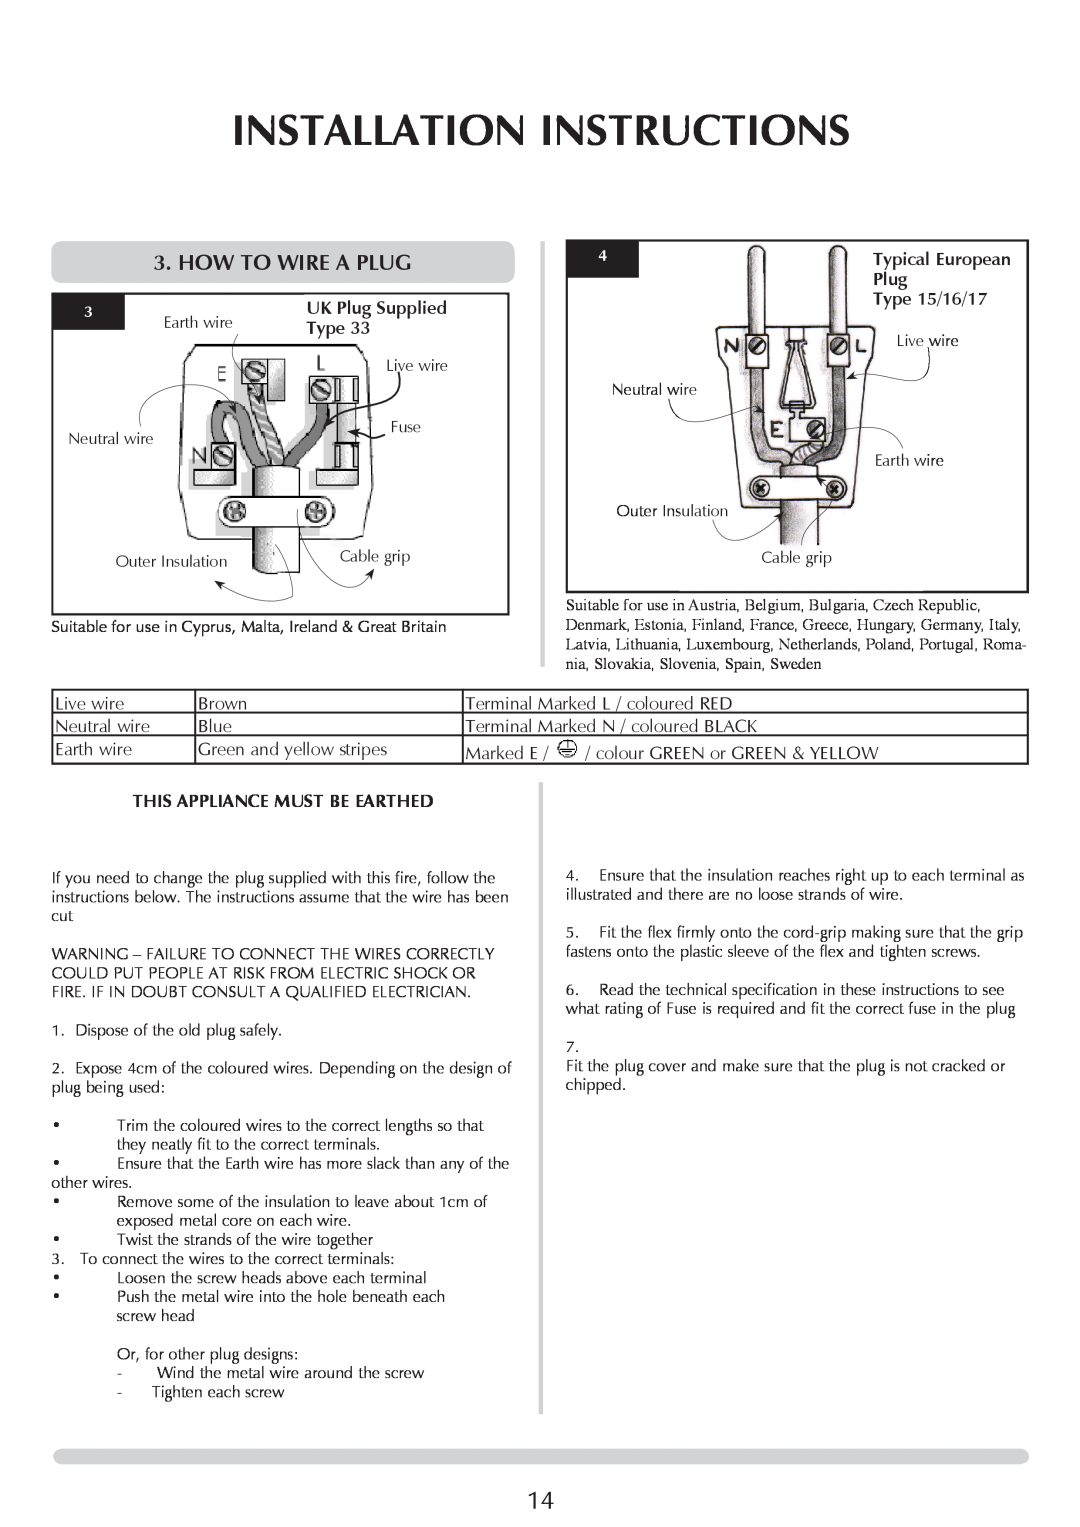 Stovax Electric Stove Range manual Installation Instructions, UK Plug Supplied, 4Typical European Plug Type 15/16/17 